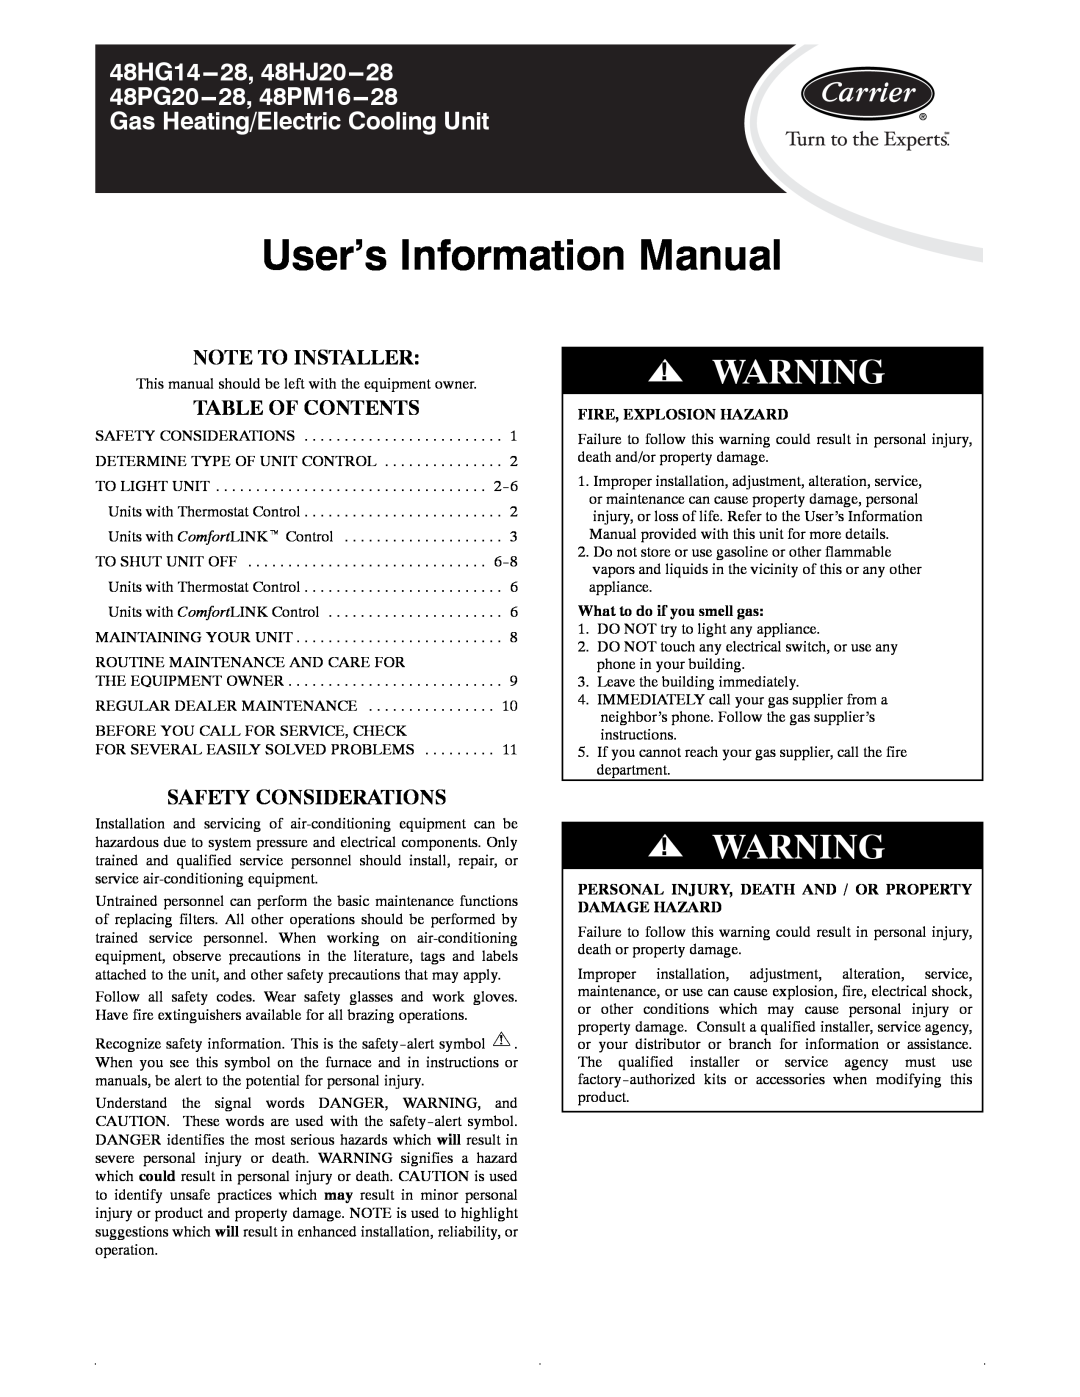 Carrier 48PG20---28 manual Note To Installer, Table Of Contents, Safety Considerations, User’s Information Manual, 48HG14 